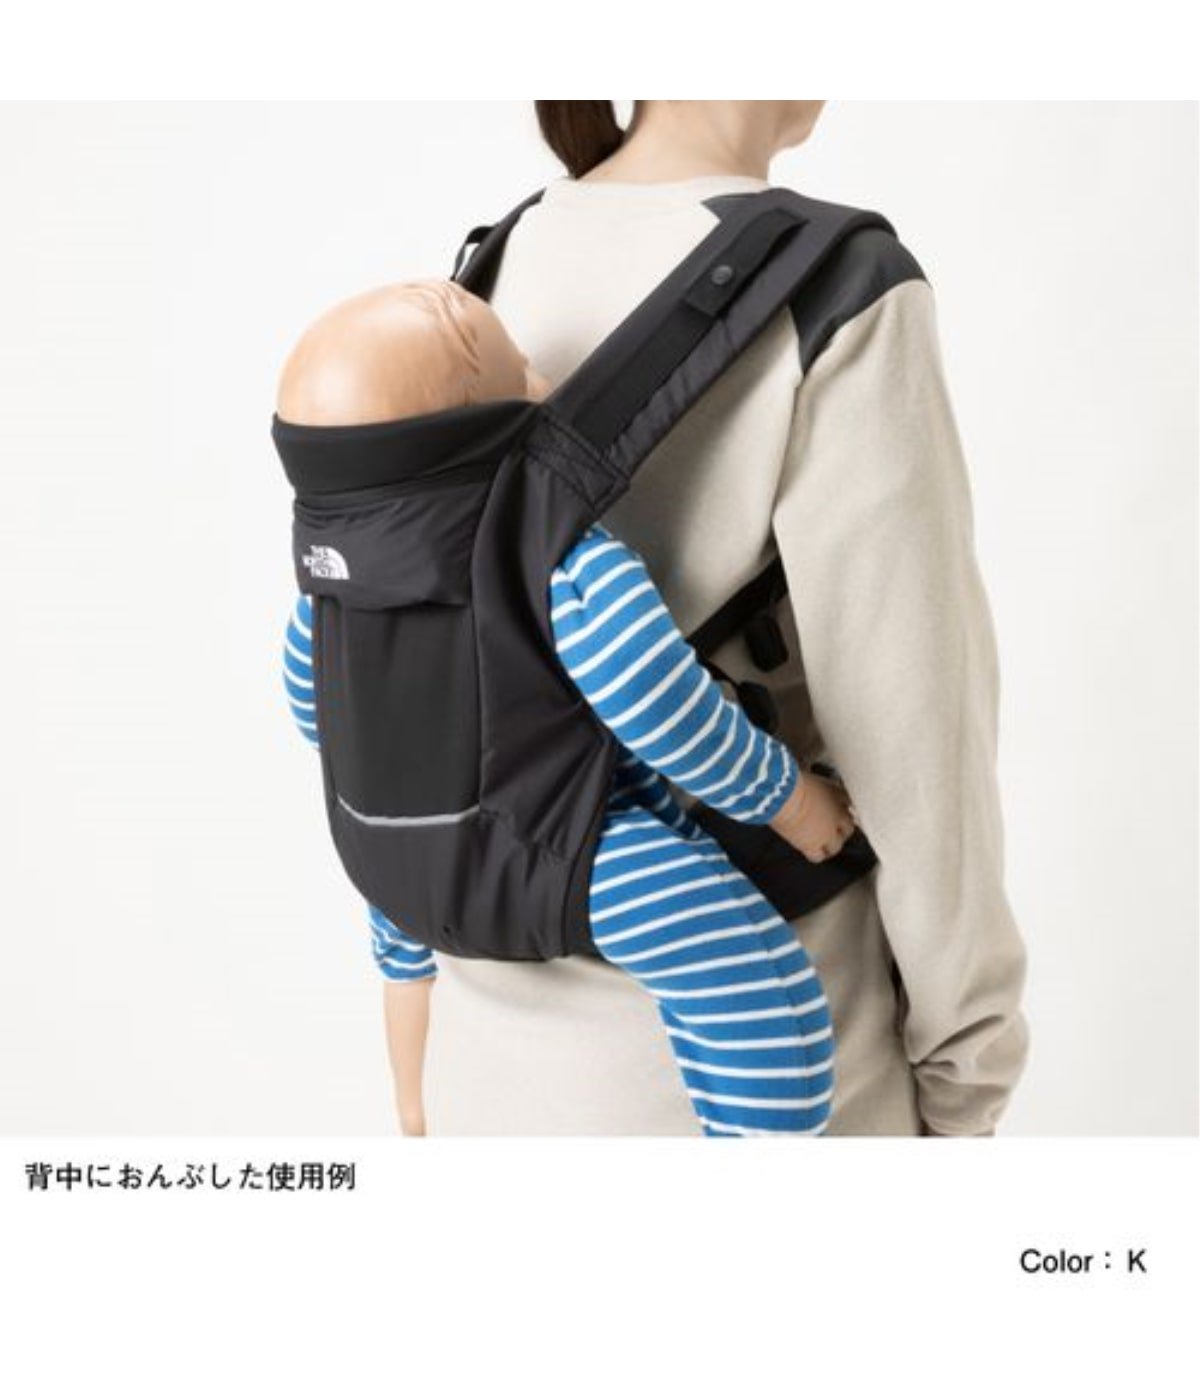 Baby Compact Carrier | THE NORTH FACE(ザ ノースフェイス 